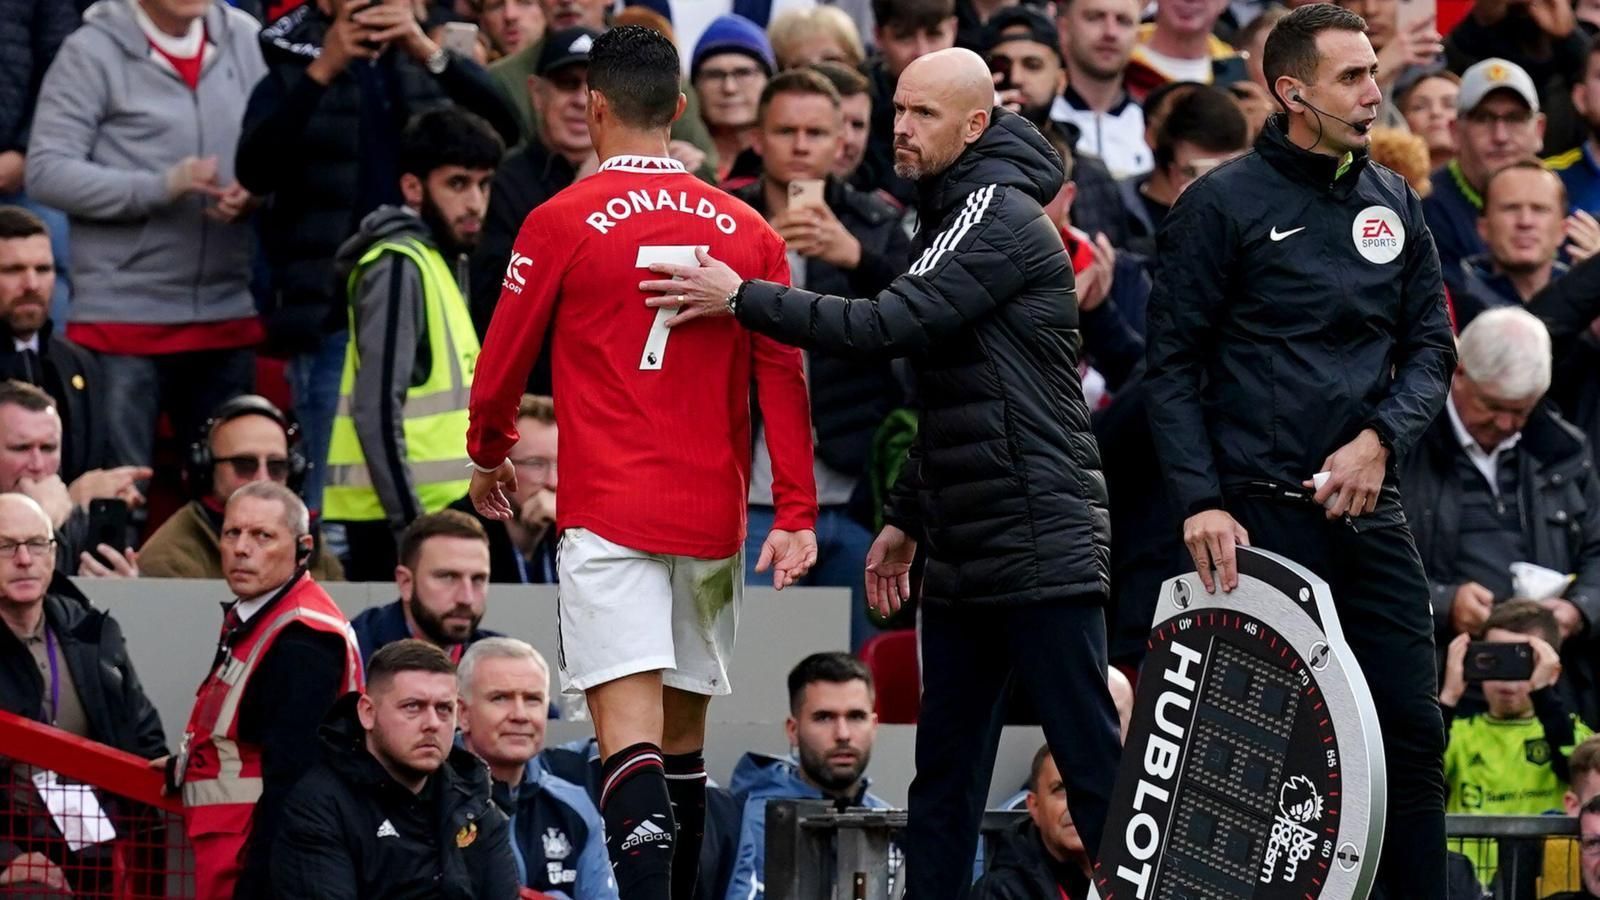 Erik Ten Hag is gradually stamping his authority at Manchester United